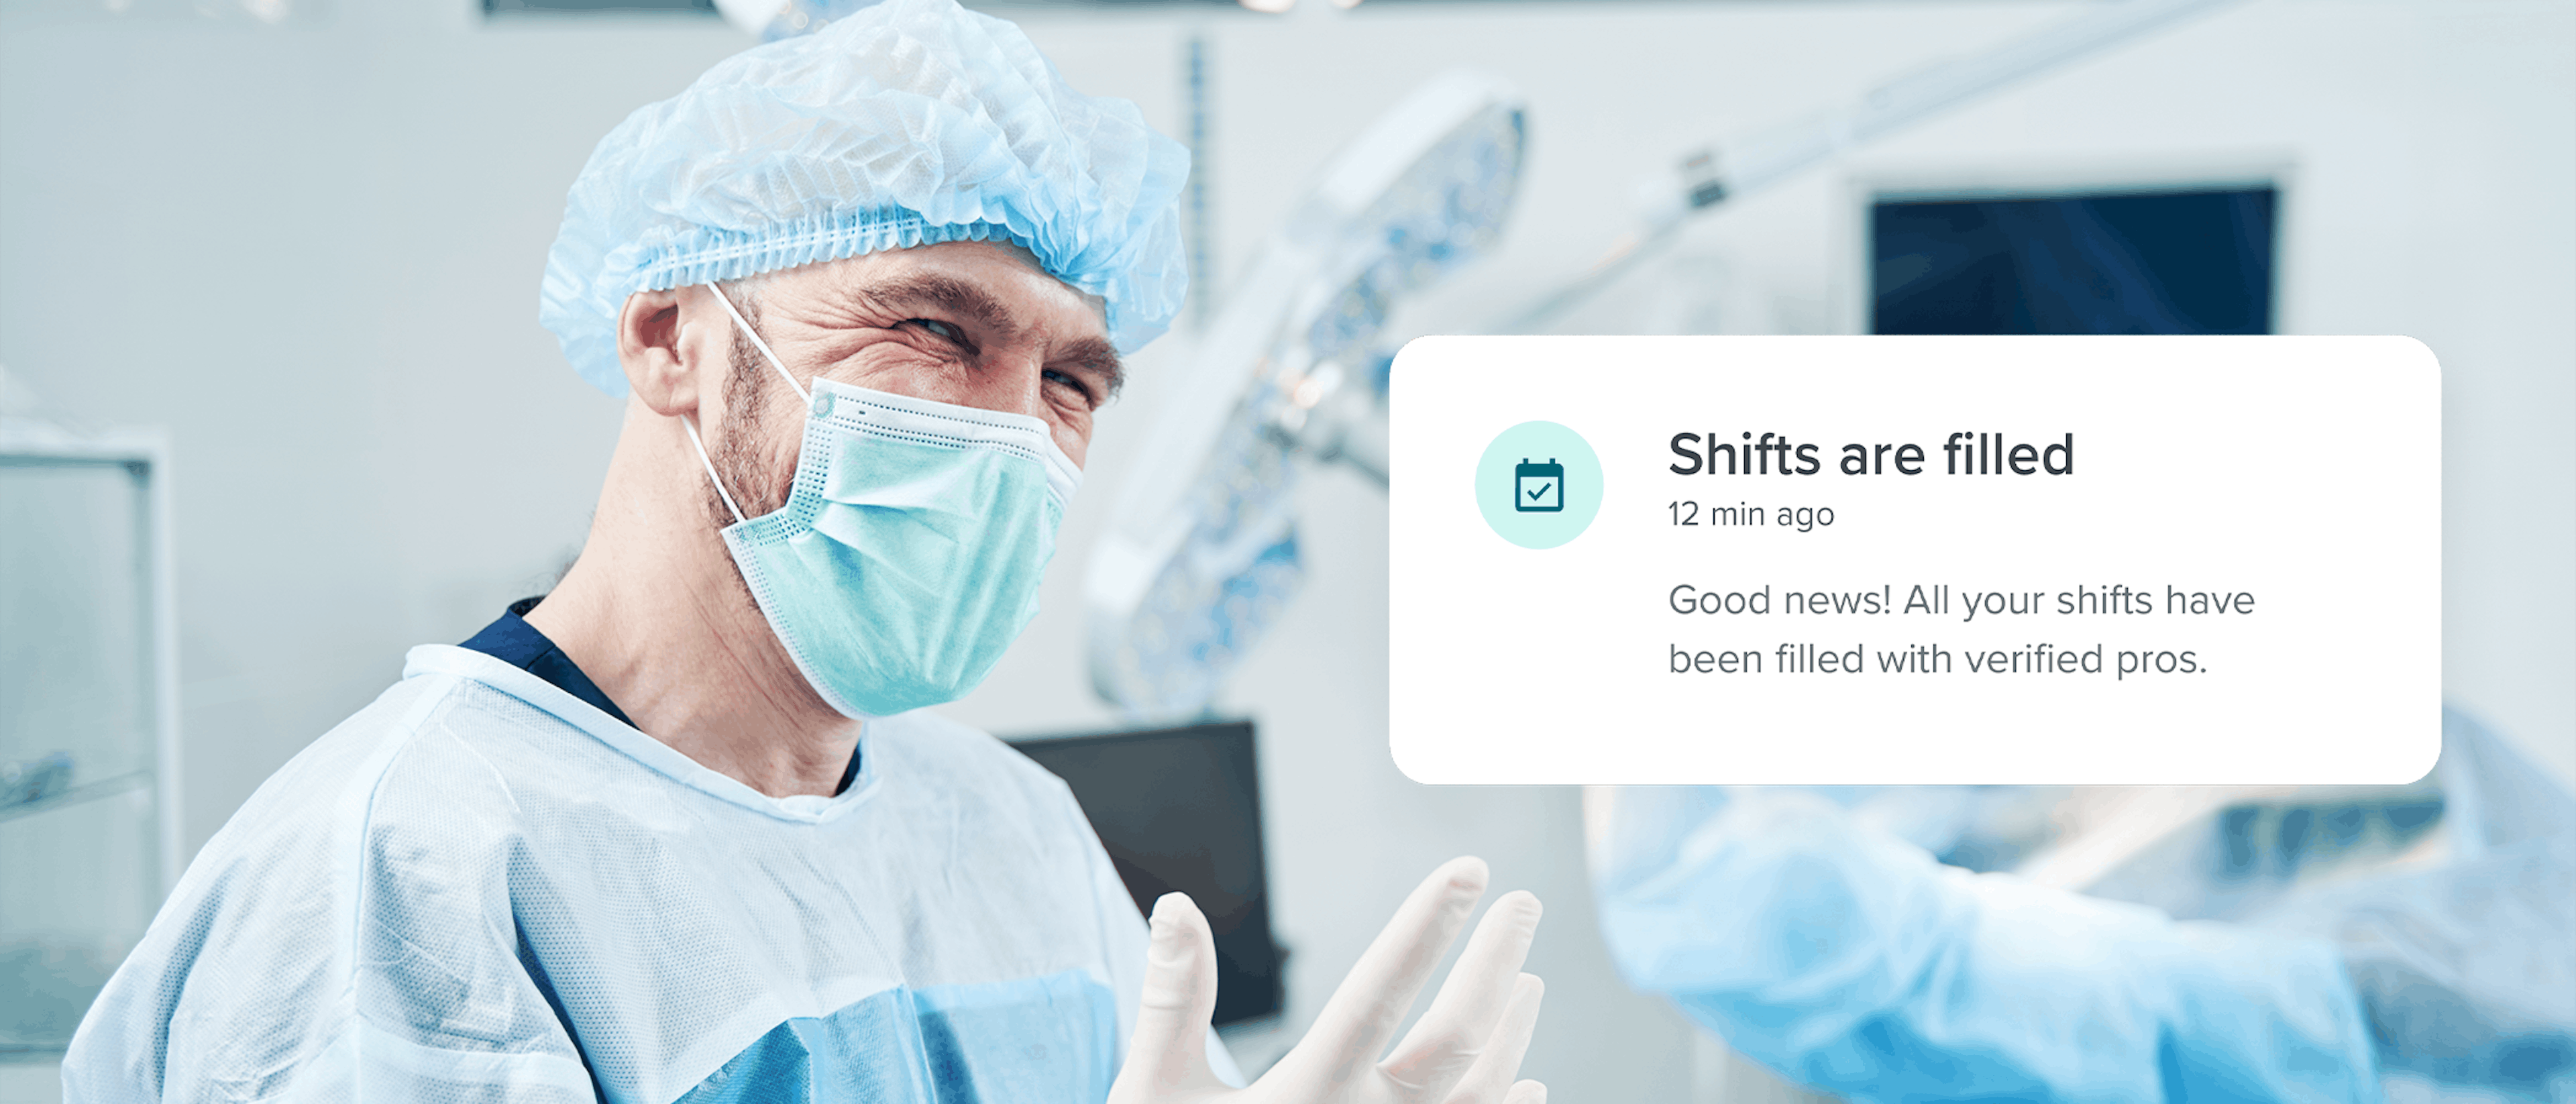 man in surgical outfit smiling in operating room